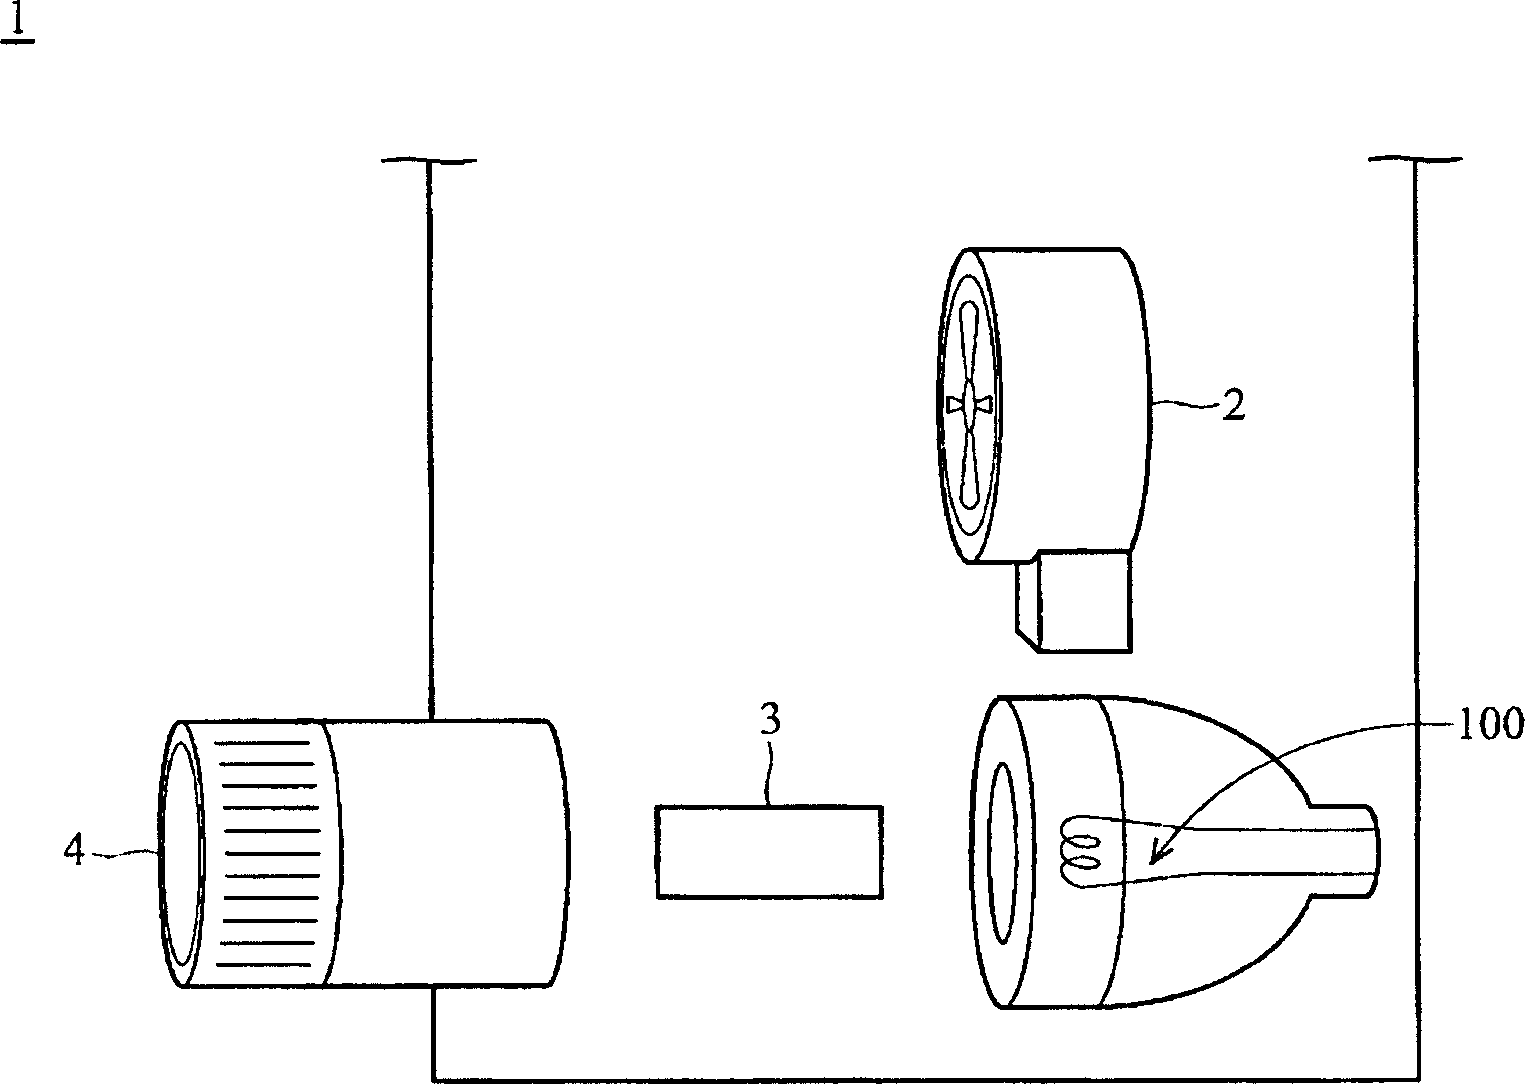 Projector, bulb assembly and wind-guiding sheet